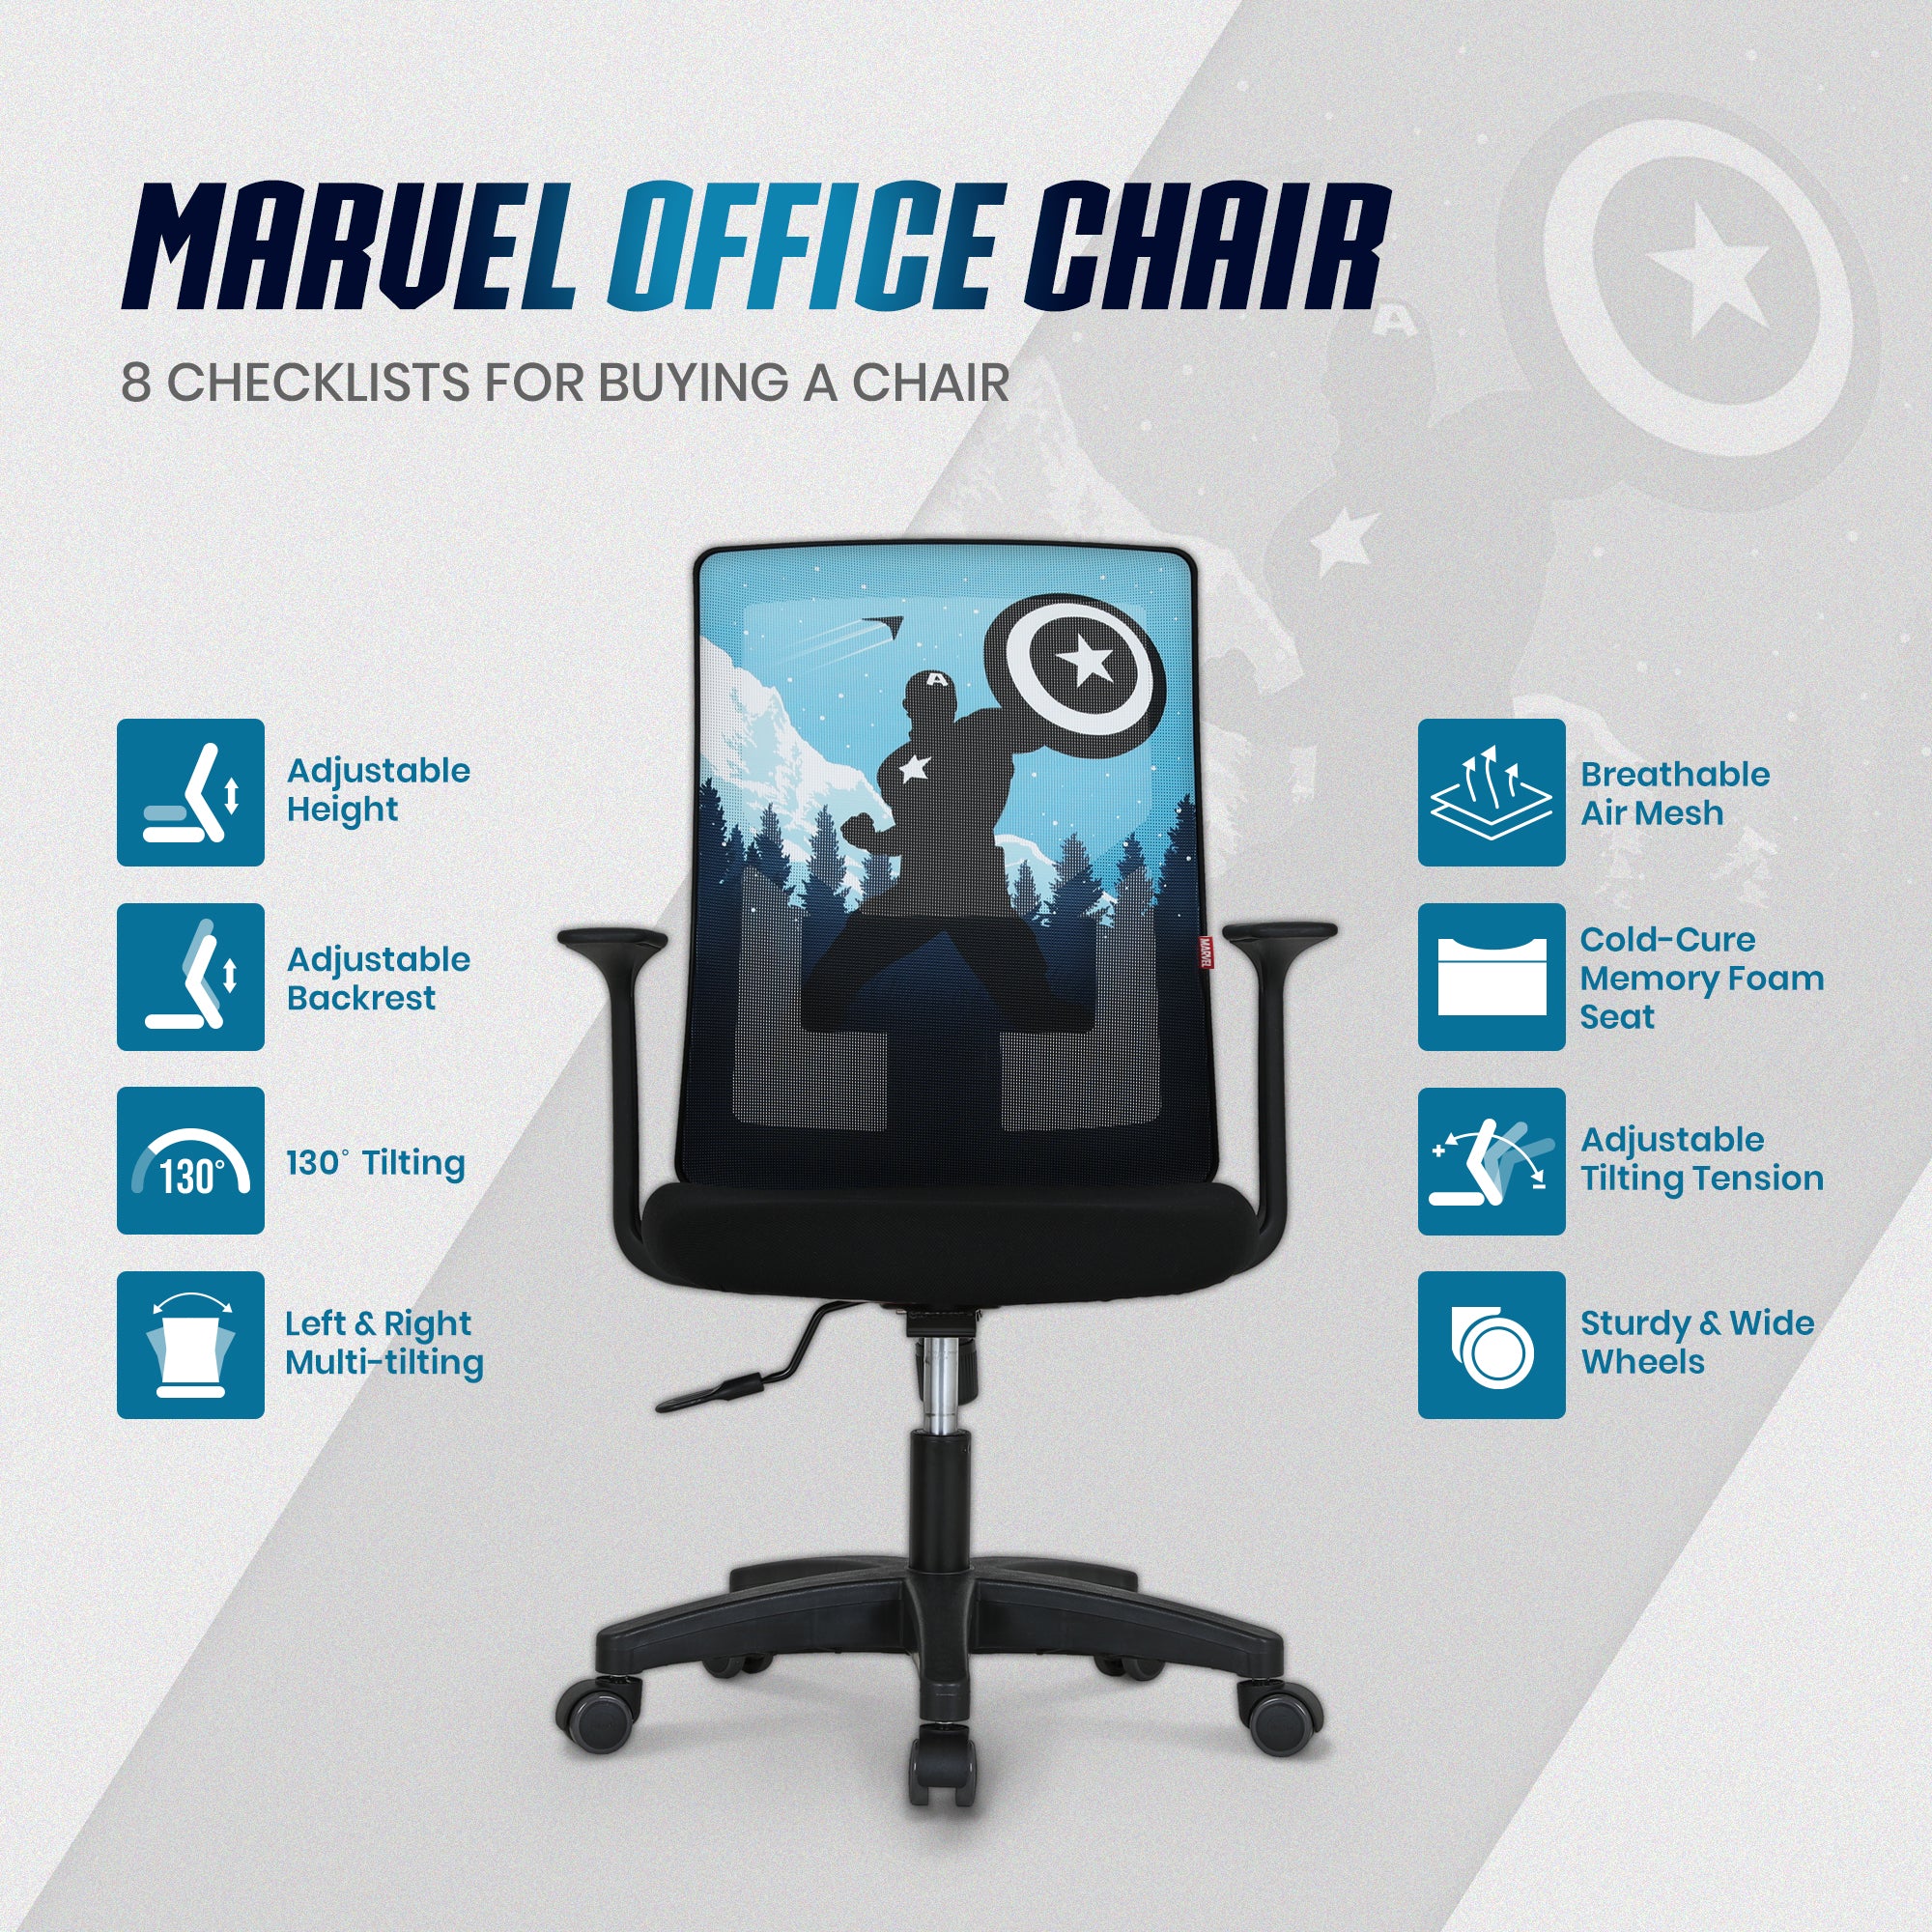 MK10 Captain America Edition (MS-M10-CA) Neo Chair Office Chair 89.98 Neo Chair